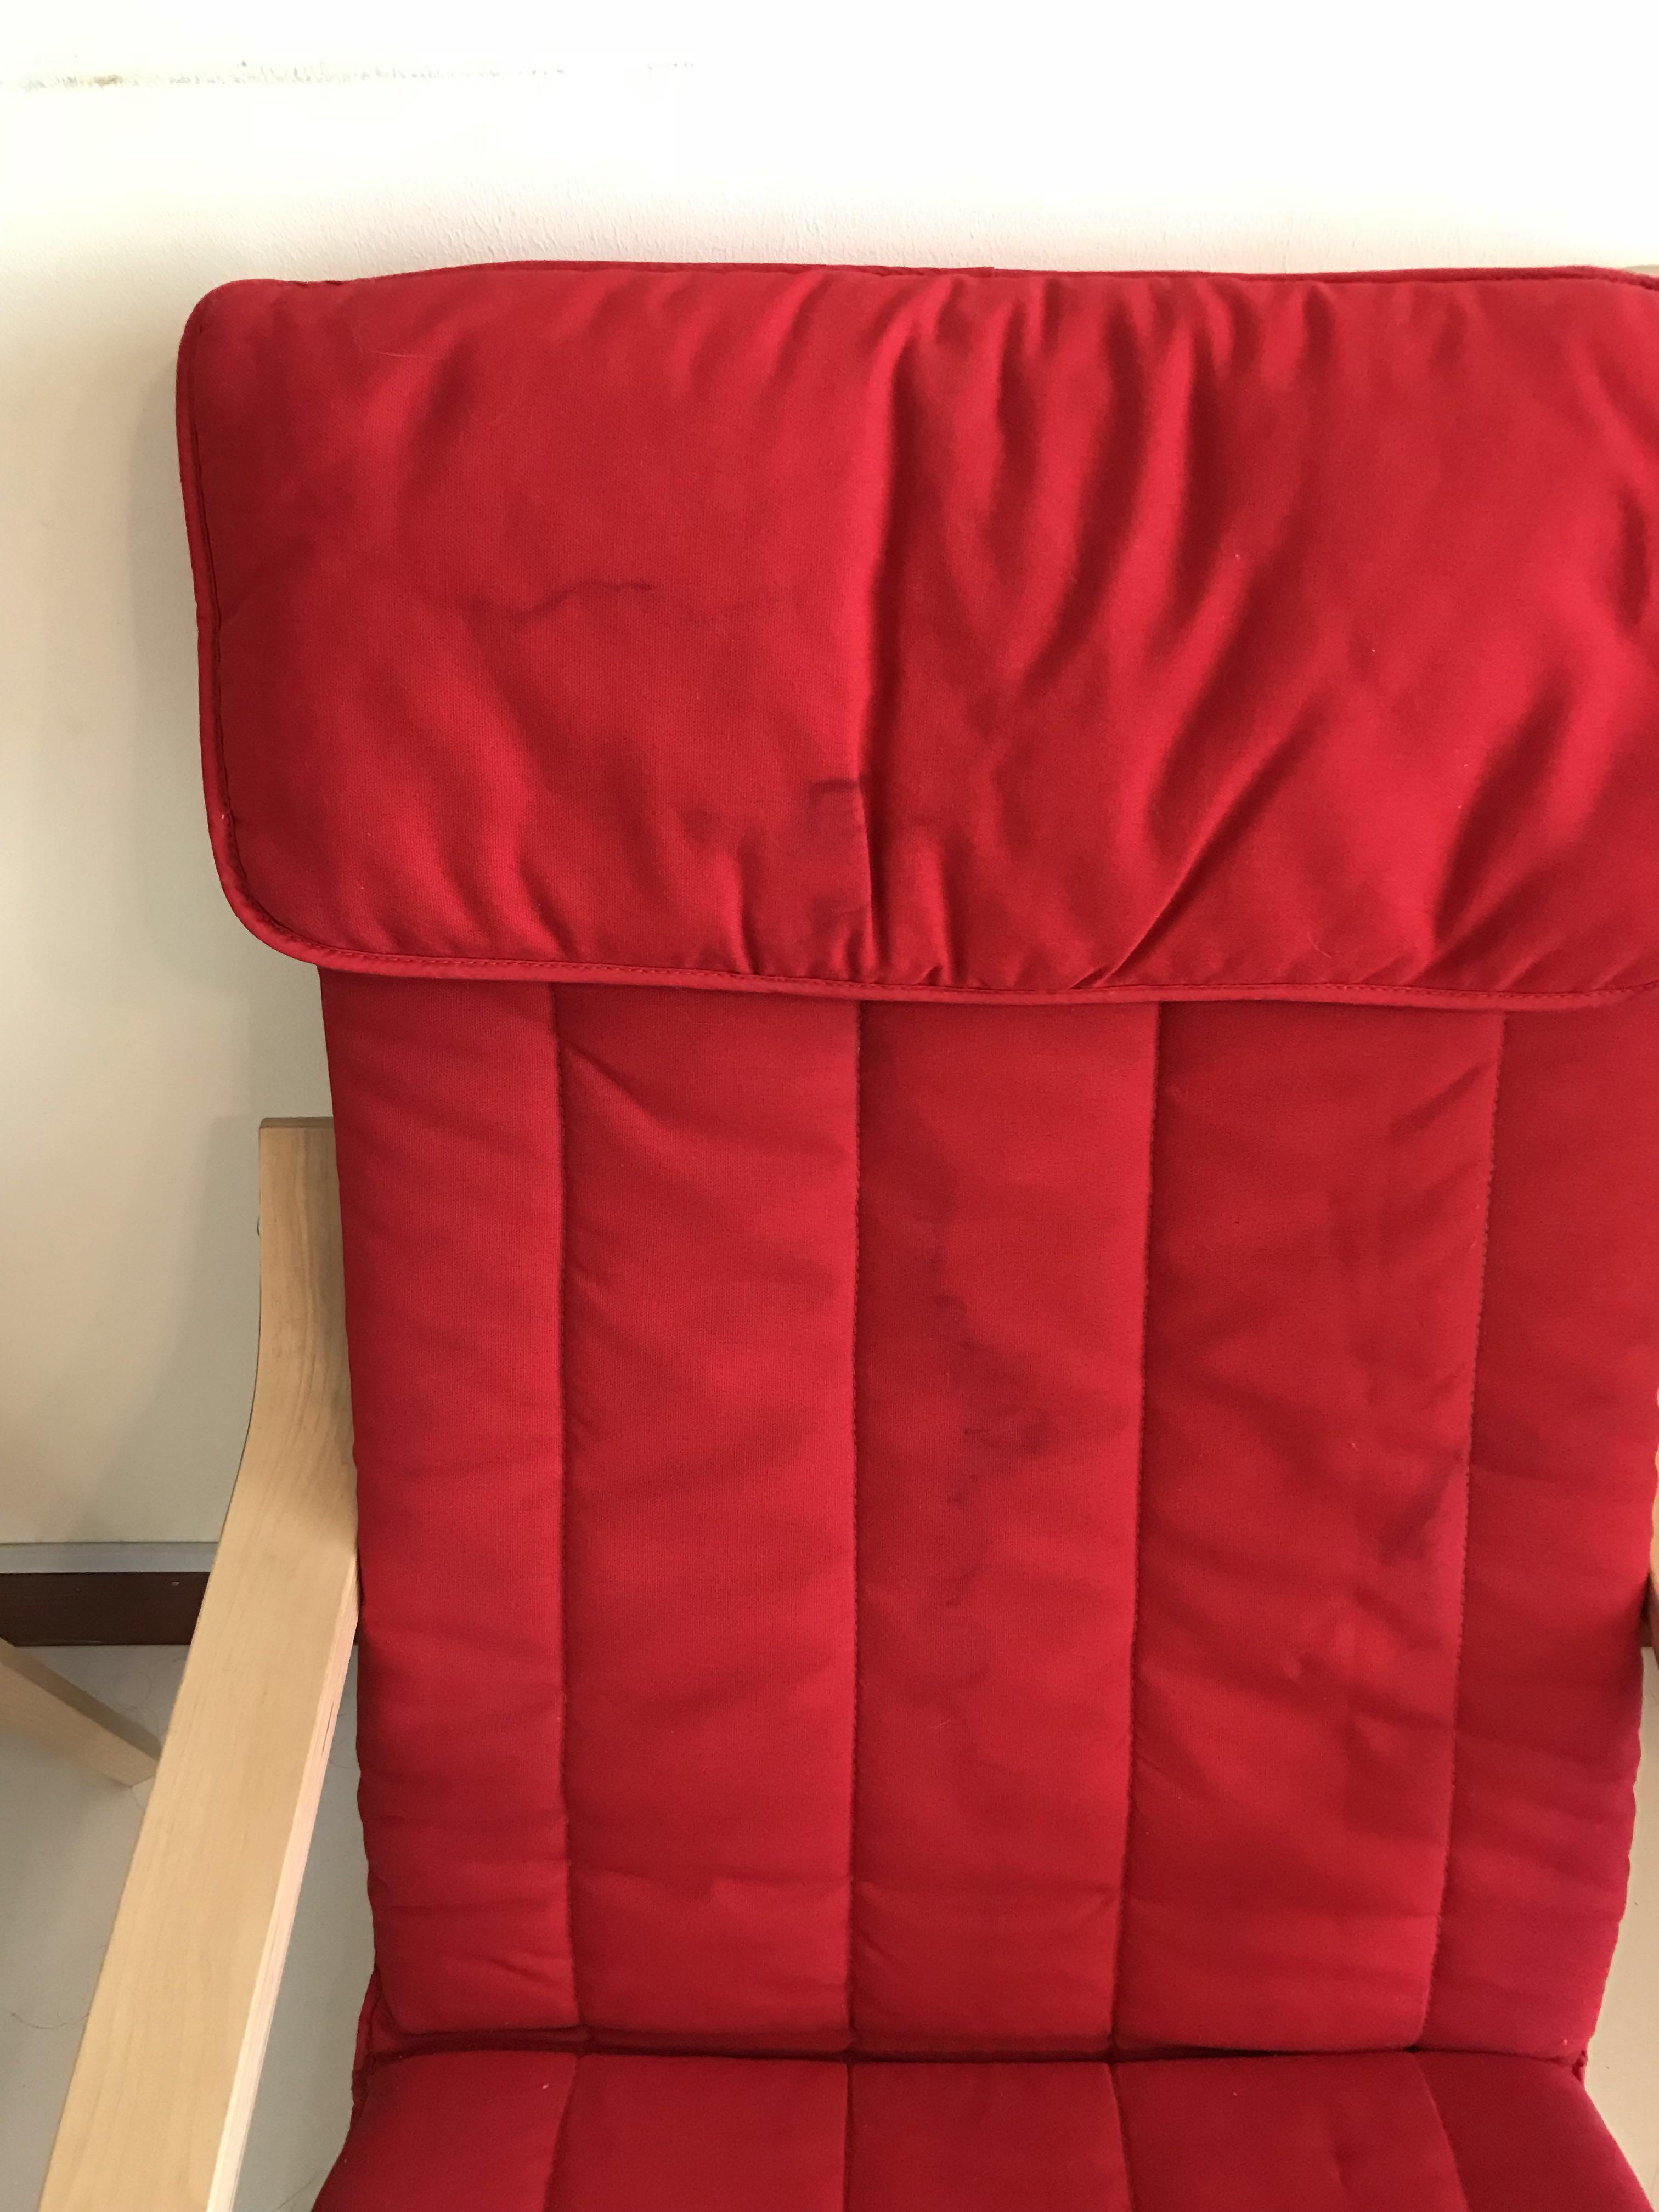 https://media.karousell.com/media/photos/products/2018/06/27/ikea_poang_chair_cushion_plus_cover_only_red_1530108706_c0452730_progressive.jpg